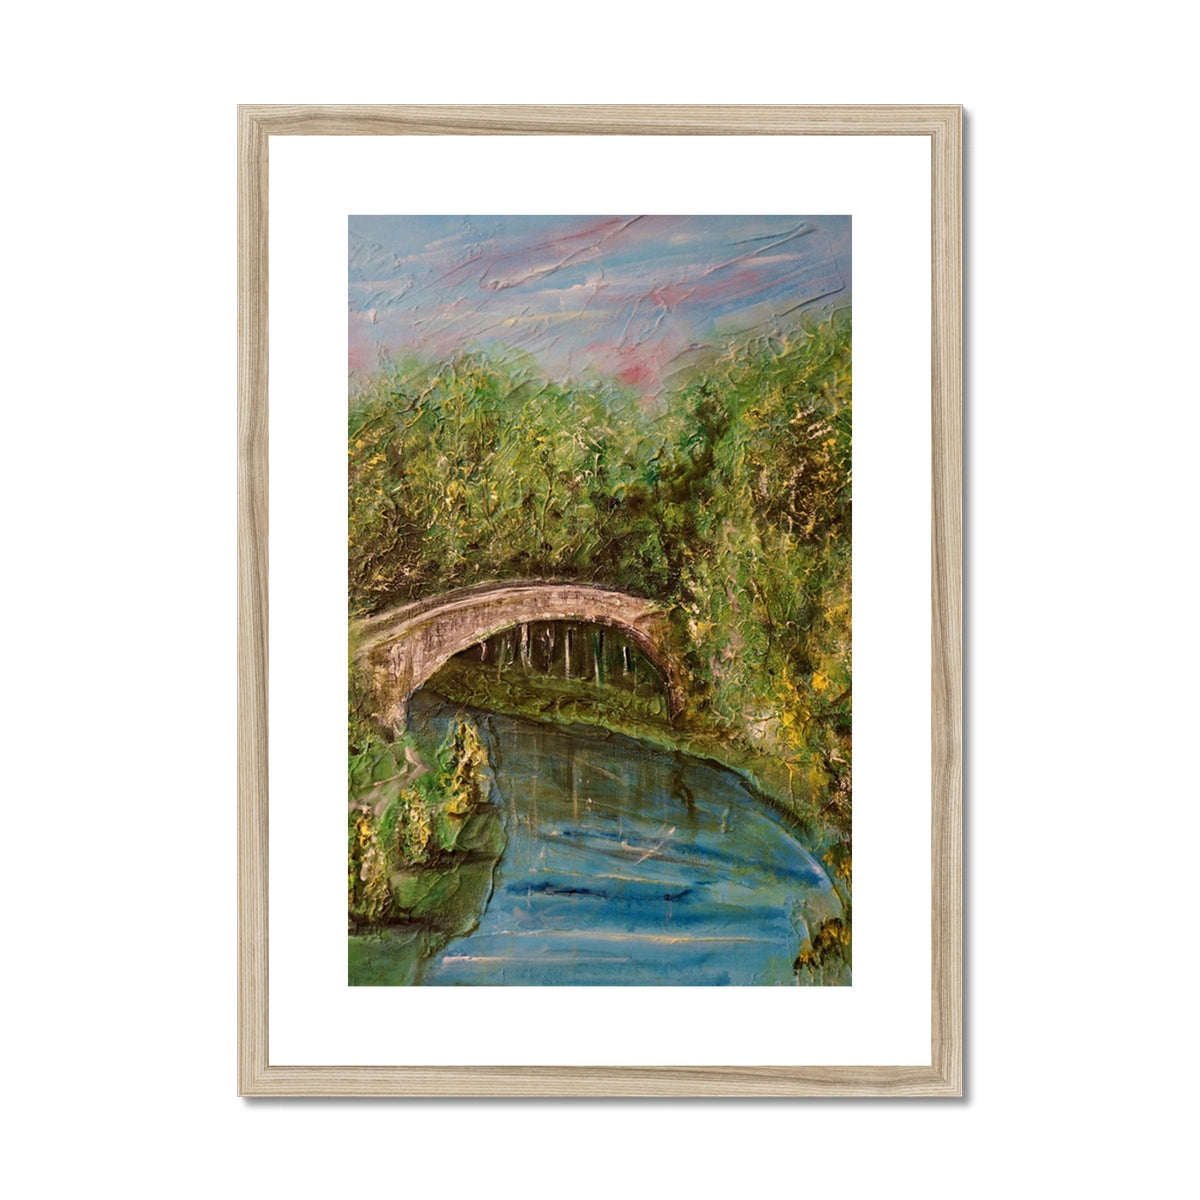 The Brig O Doon Painting | Framed & Mounted Prints From Scotland-Framed & Mounted Prints-Historic & Iconic Scotland Art Gallery-A2 Portrait-Natural Frame-Paintings, Prints, Homeware, Art Gifts From Scotland By Scottish Artist Kevin Hunter